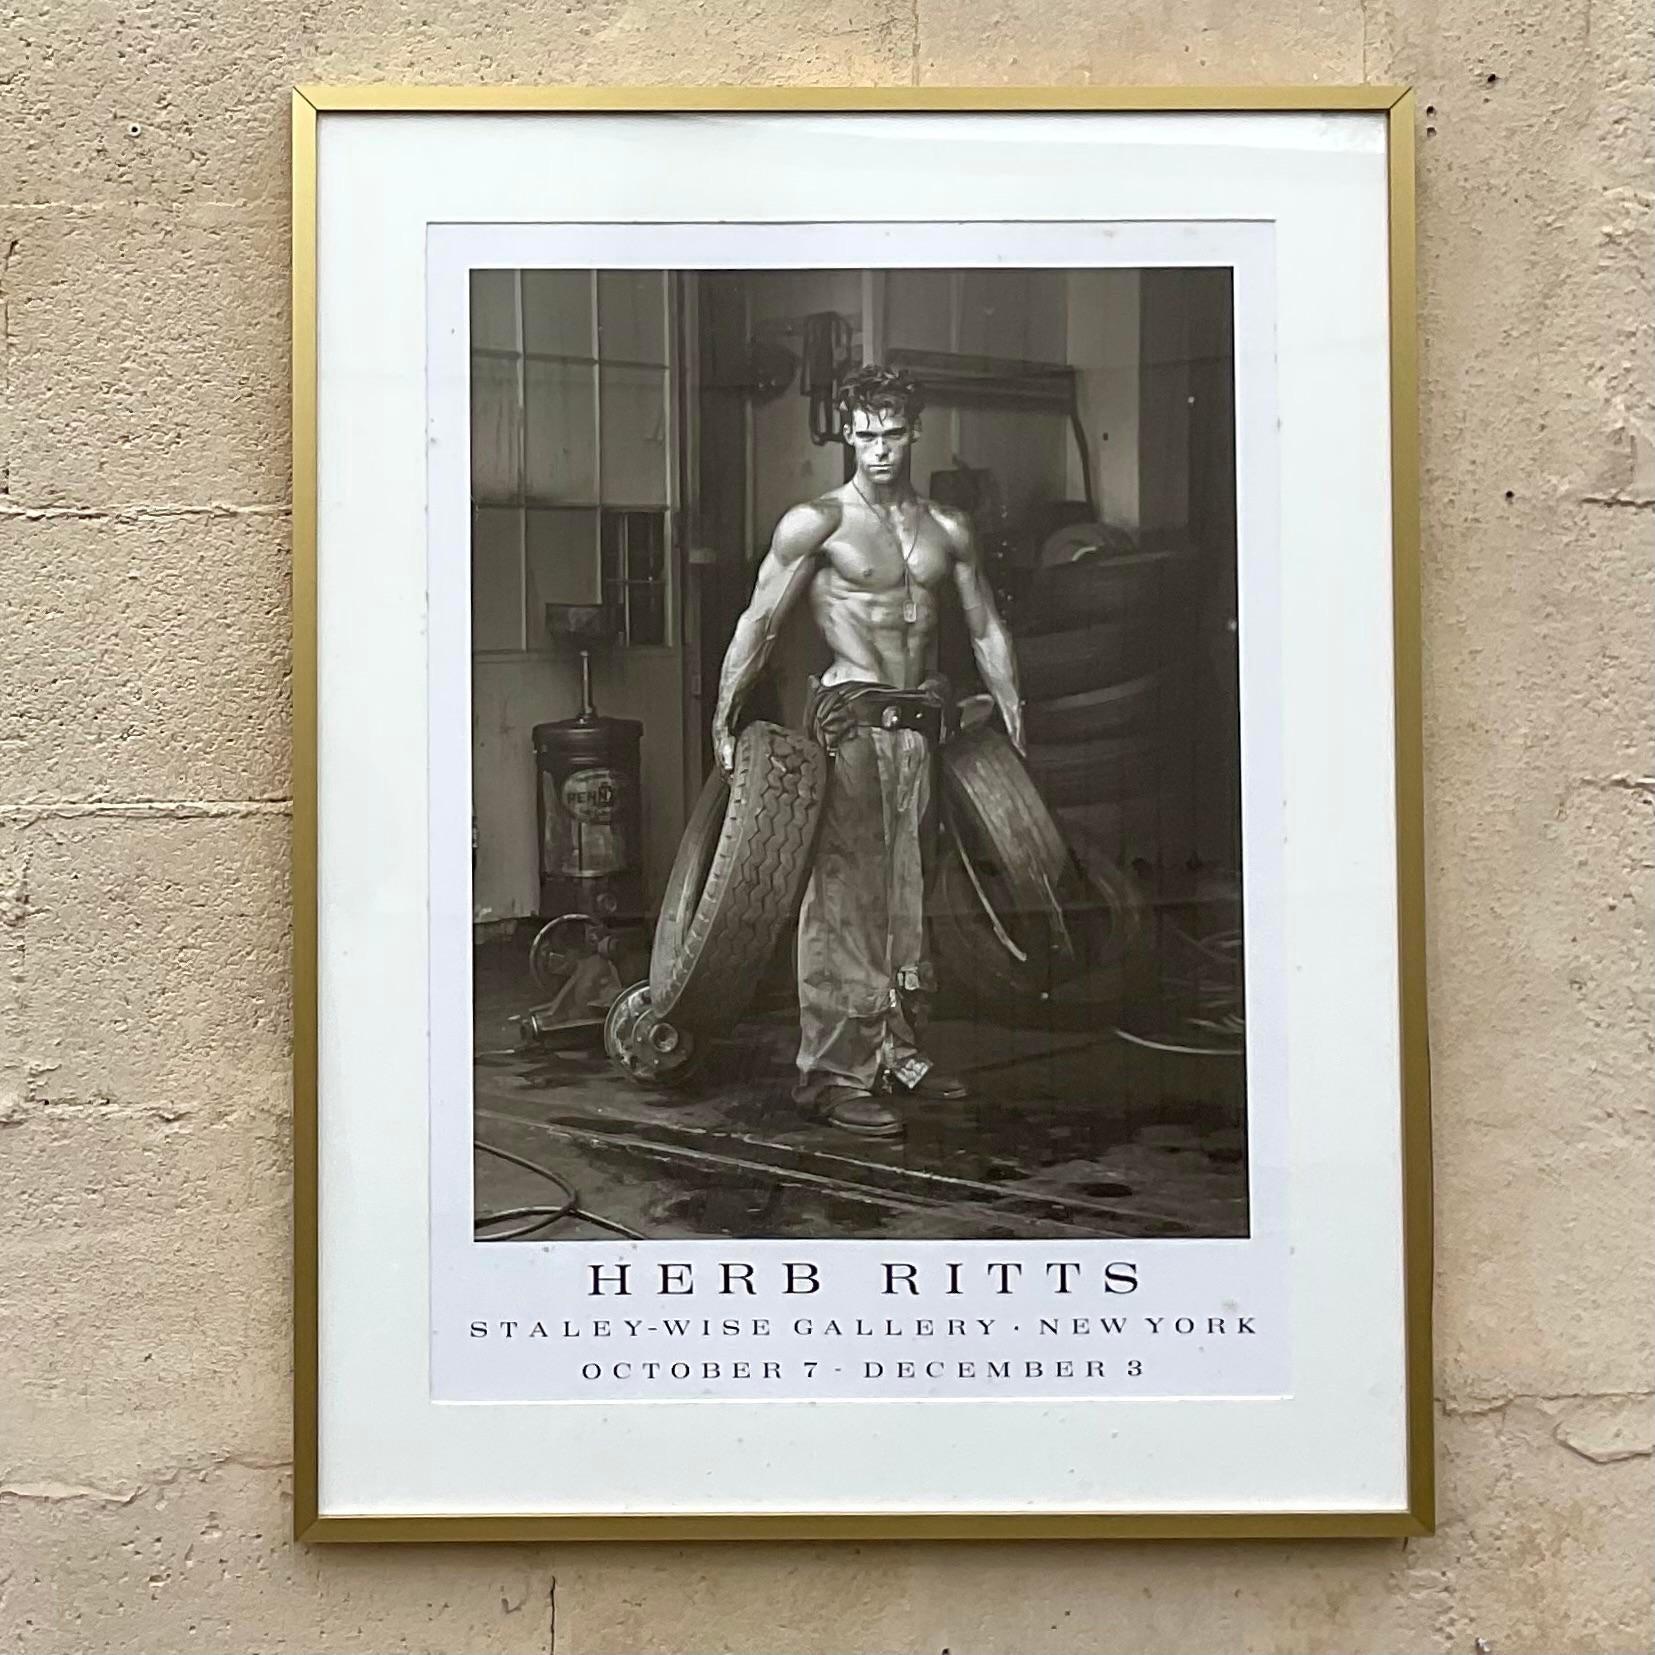 A fabulous vintage Boho poster. An original Herb Ritts poster from his show at the Staley Wise Gallery in NYC. Acquired from a Fort Lauderdale estate. 